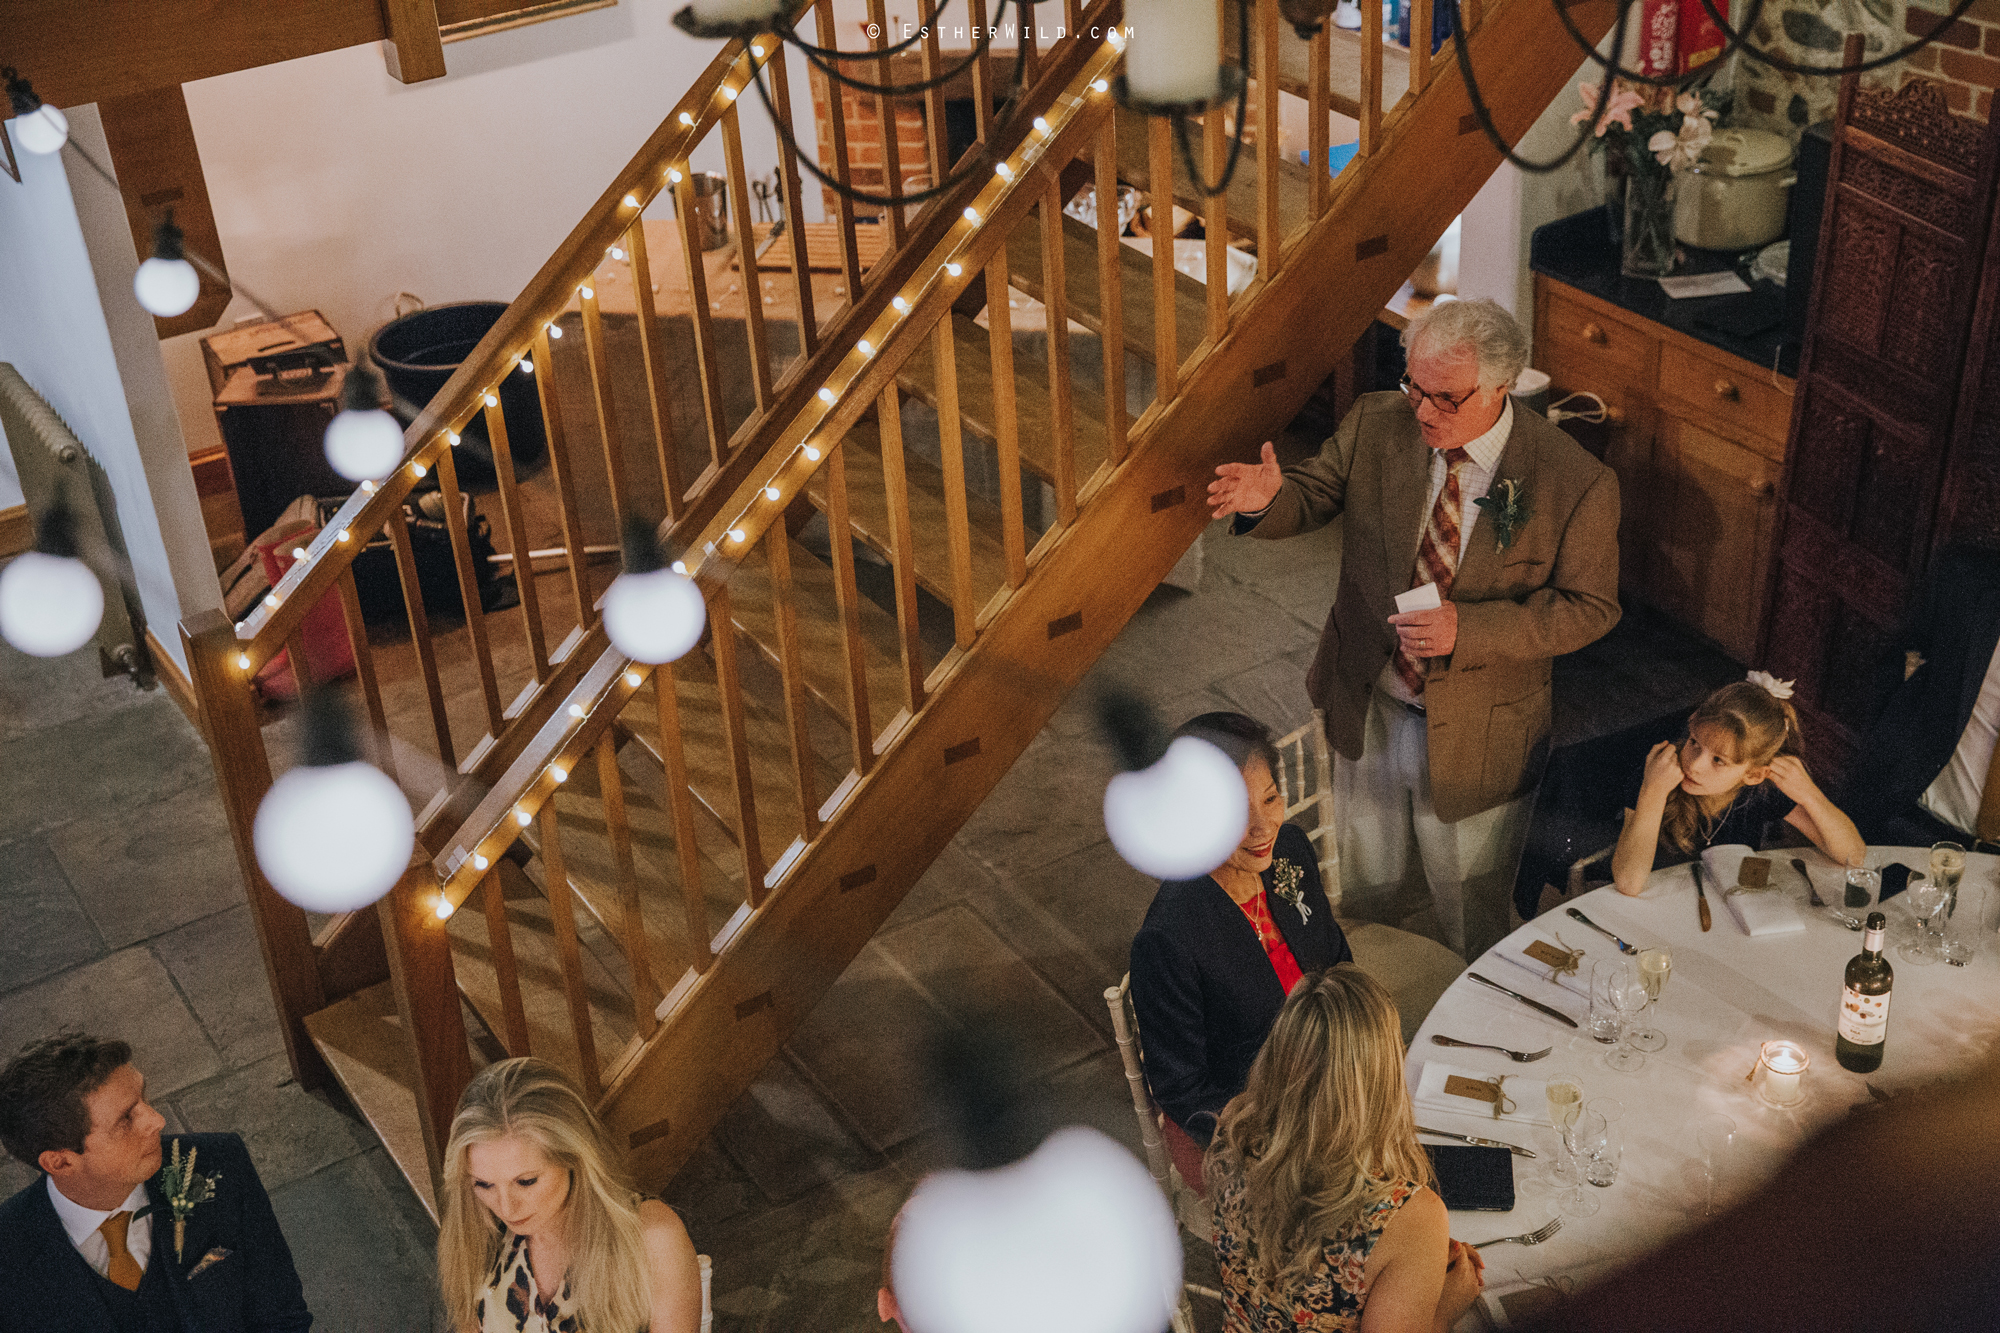 Wedding_Photographer_Chaucer_Barn_Holt_Norfolk_Country_Rustic_Venue_Copyright_Esther_Wild_IMG_1566.jpg